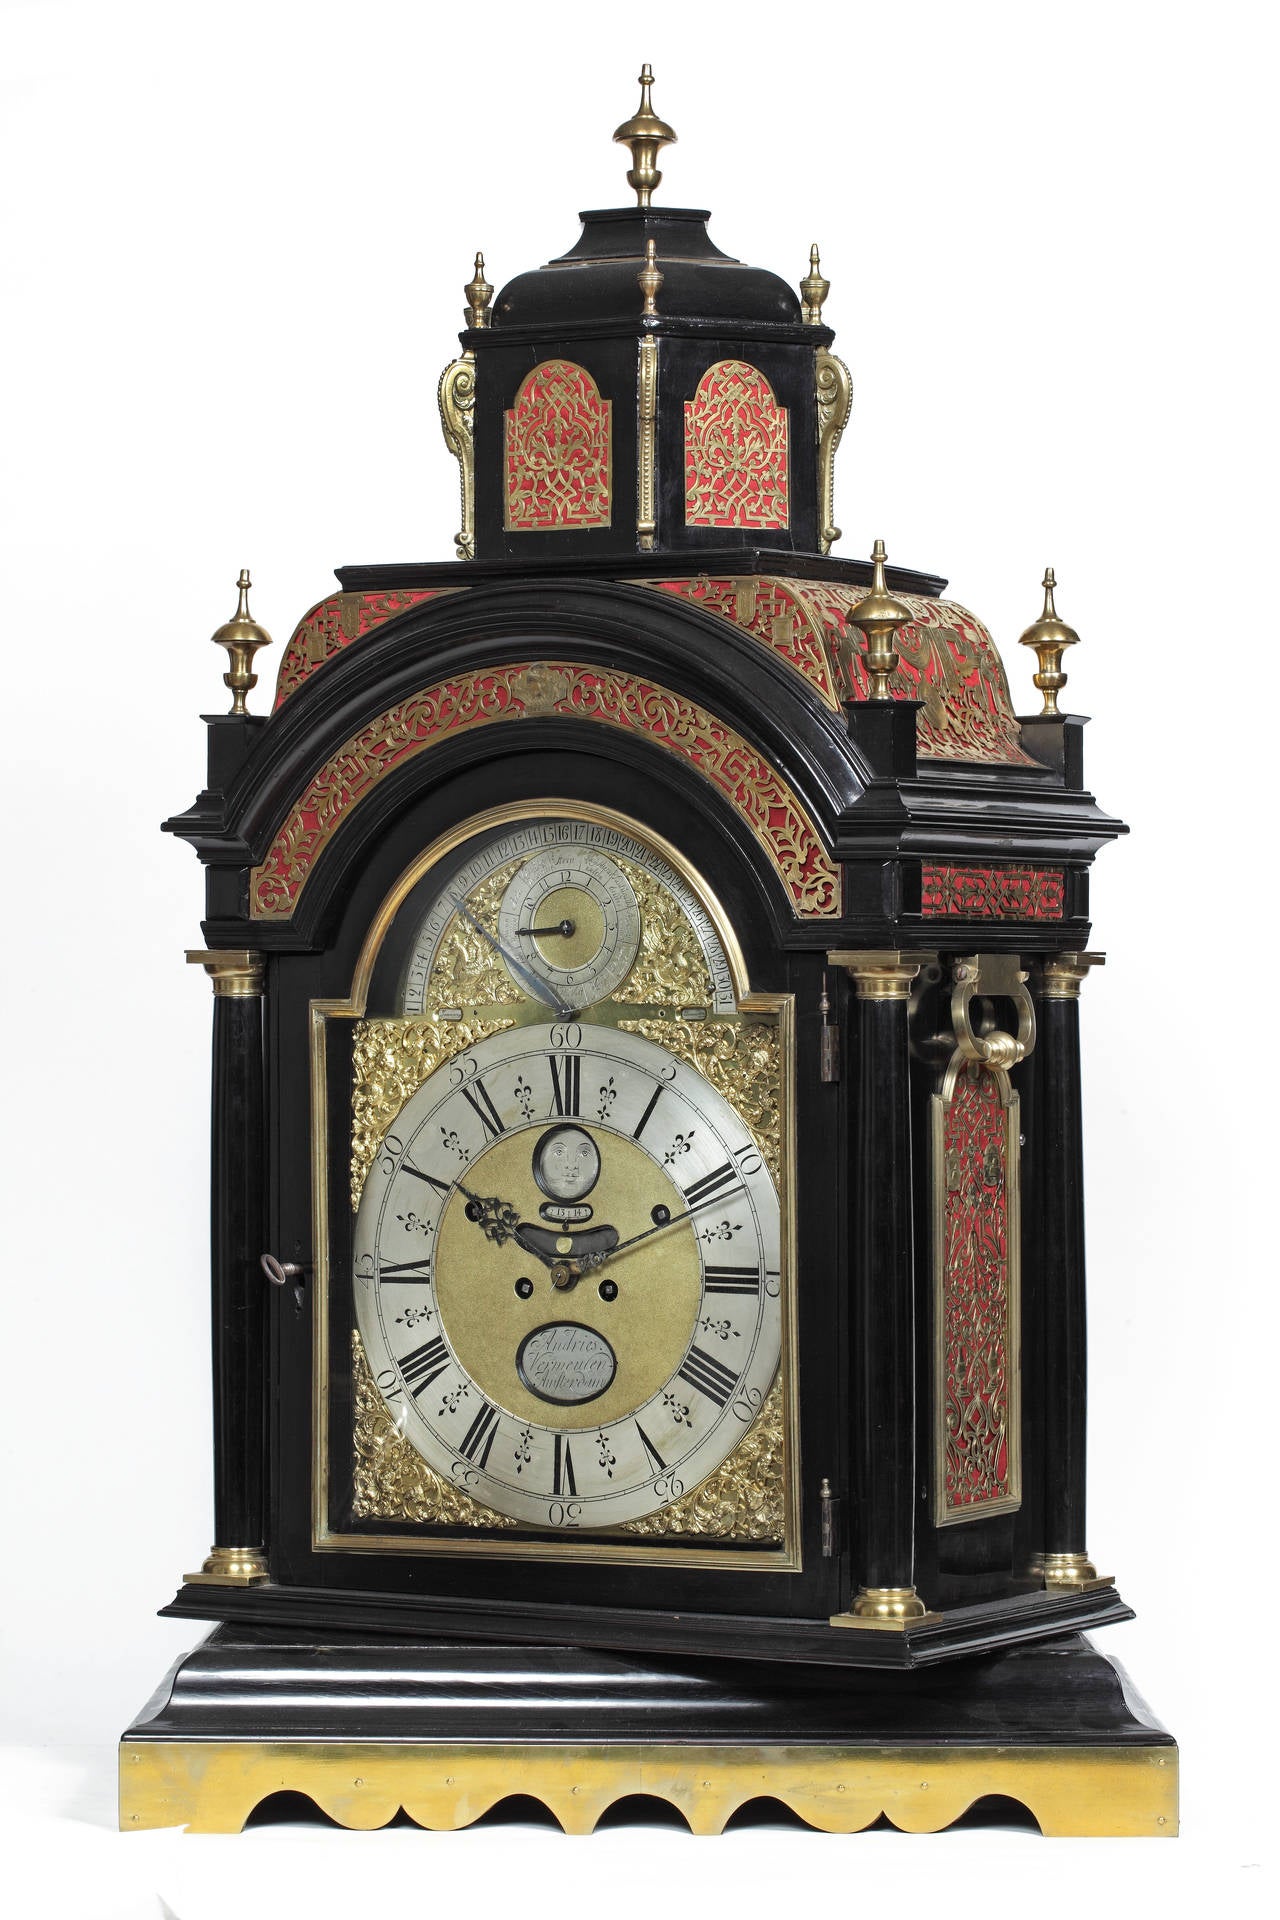 The ebony veneered case with cupola top and urn finial, with finely pierced and engraved brass sound frets against red ground to the top and sides, with finials and handles, on a waved turntable plinth. The dial with silvered Roman and Arabic